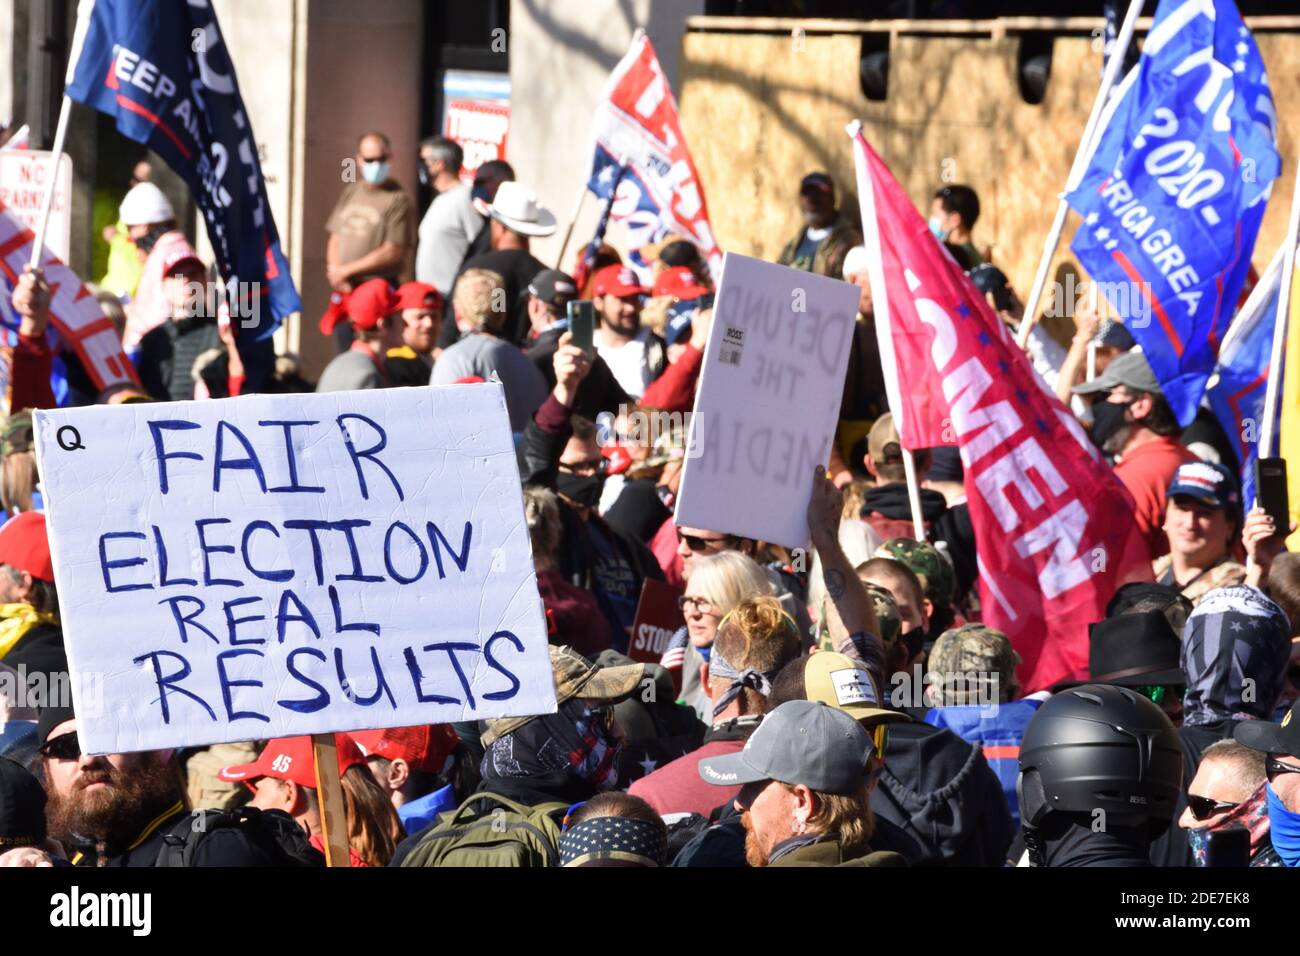 Washington DC. November 14, 2020. Million Maga March. People with political signs, Trump flags and Women for Trump flag at Freedom Plaza. Stock Photo